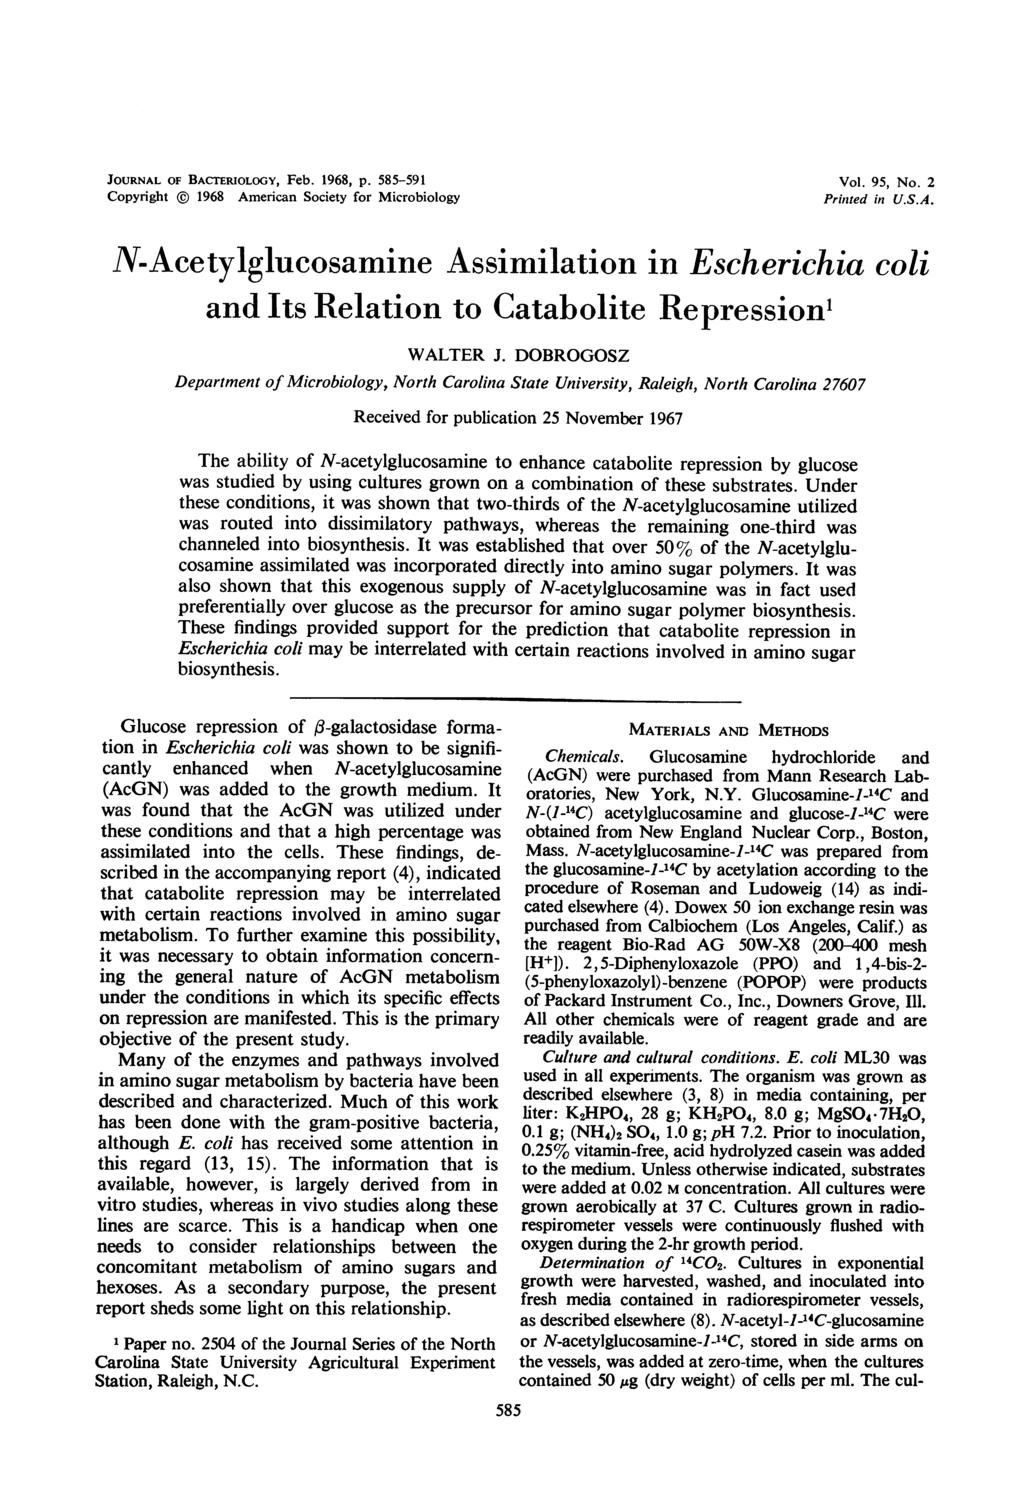 JOURNAL OF BACTERIOLOGY, Feb. 1968, p. 585-591 Copyright @ 1968 American Society for Microbiology Vol. 95, No. 2 Prinzted in U.S.A. N-Acetylglucosamine Assimilation in Escherichia coli and Its Relation to Catabolite Repression' WALTER J.